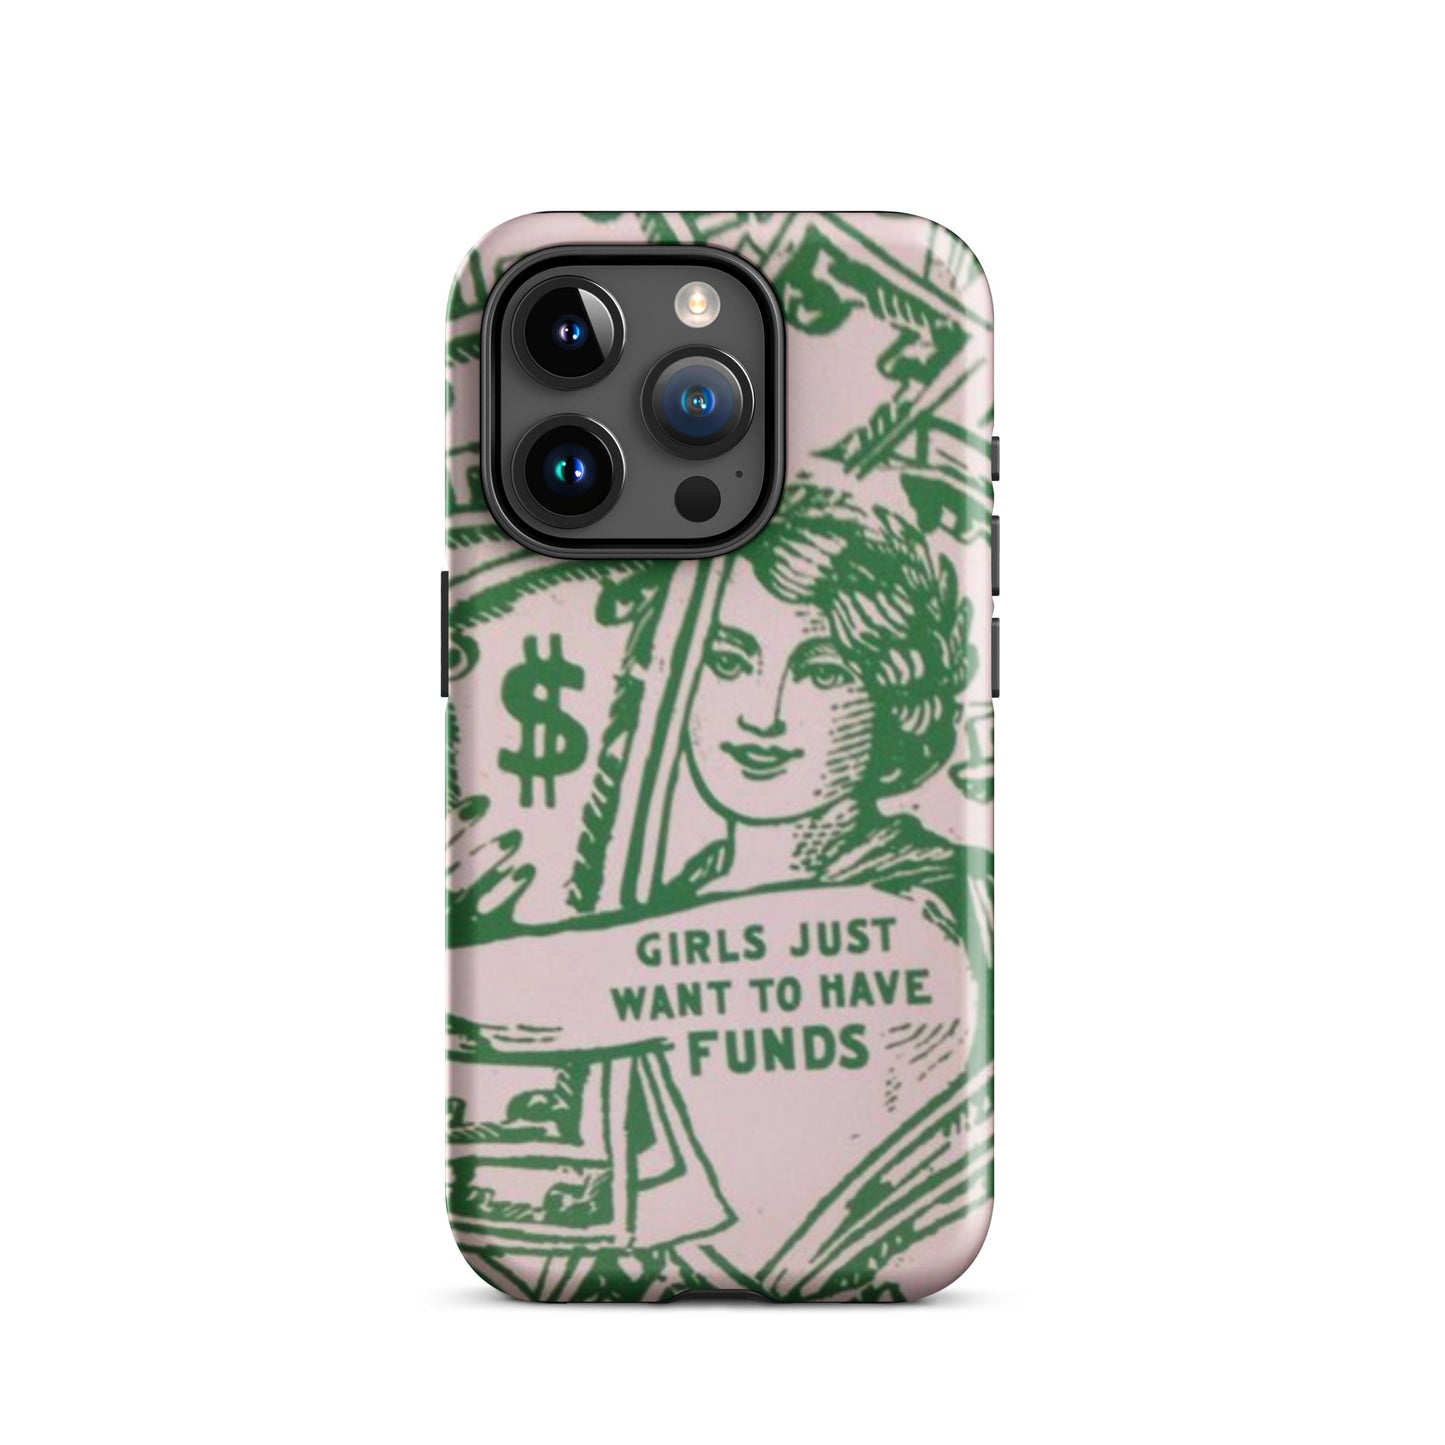 Girls Just Want To Have Funds II iPhone® Case